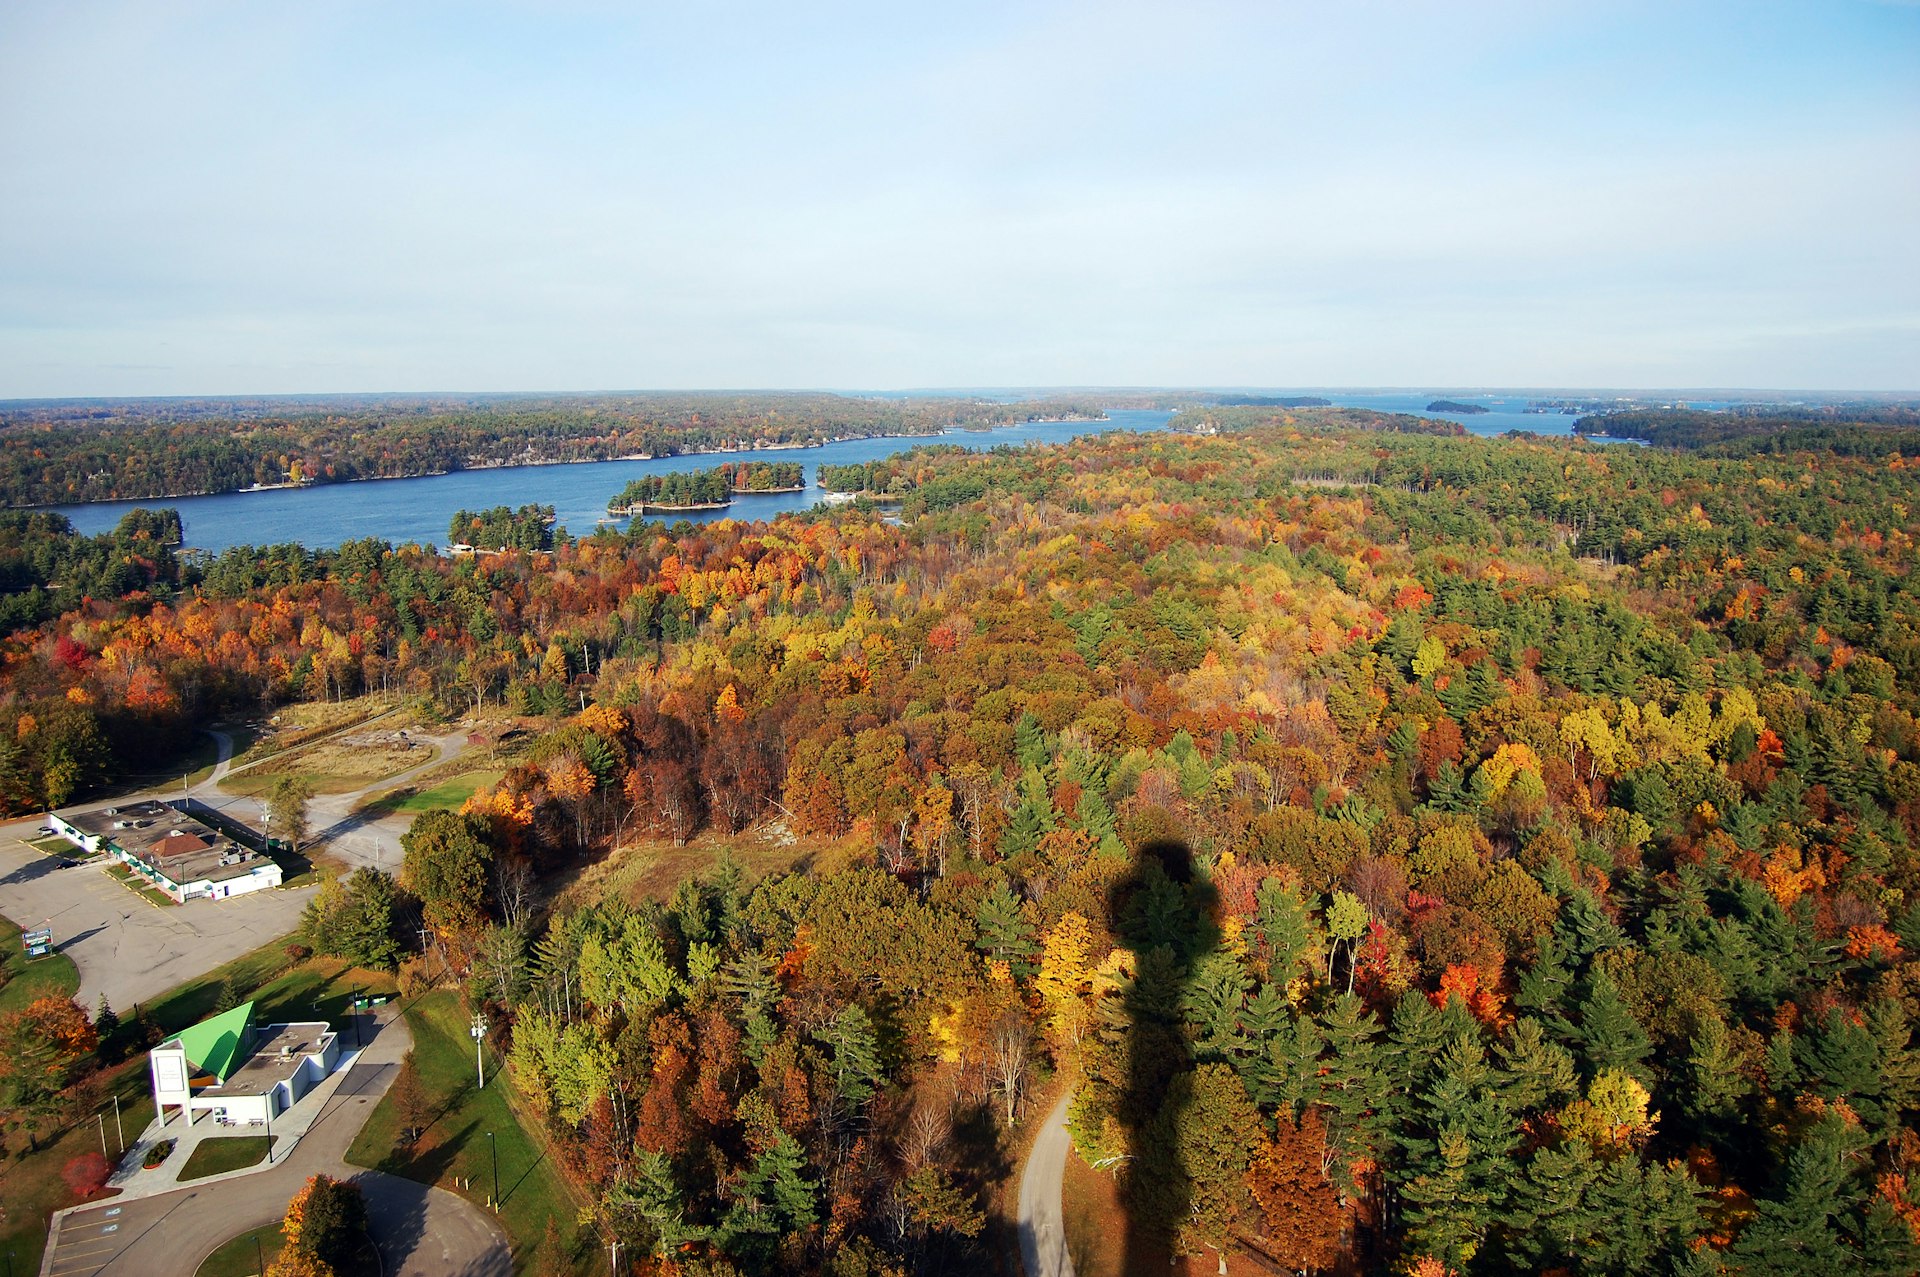 Thousand Islands National Park, as seen from the sky deck on Hill Island during fall.